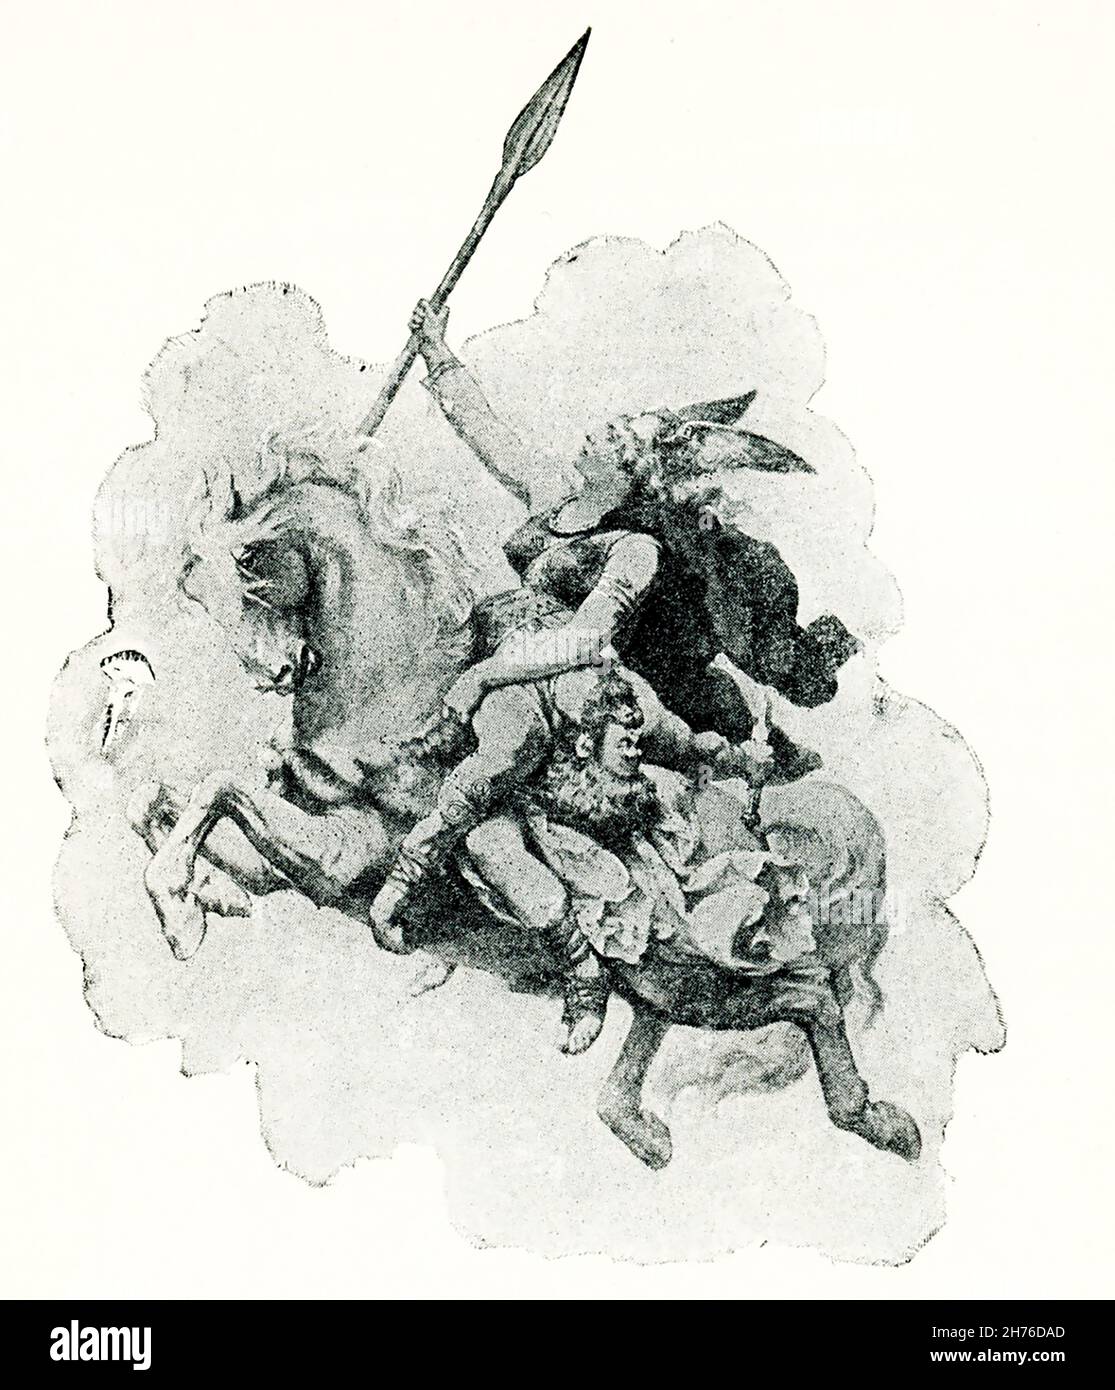 This image shows a Valkyrie bearing a hero to valhalla. The painting is by K Dielitz. According to Norse mythology, the Valkyries were the daughters or attendants of Odin, the chief god (also called Wotan). The Norse believed the Valkyries came to battlefield, chose those who would die, and carried them back to Valhalla (a fallen warrior can be seen here in front of a Valkyrie). Their leader was Brynhild (also spelled Brunhild, Brunhilde, Brynhildr). Konrad Dielitz (died 1933)  was a German portrait and genre painter of high rank. He was born in 1845 in Berlin, and was the son of a well-known Stock Photo